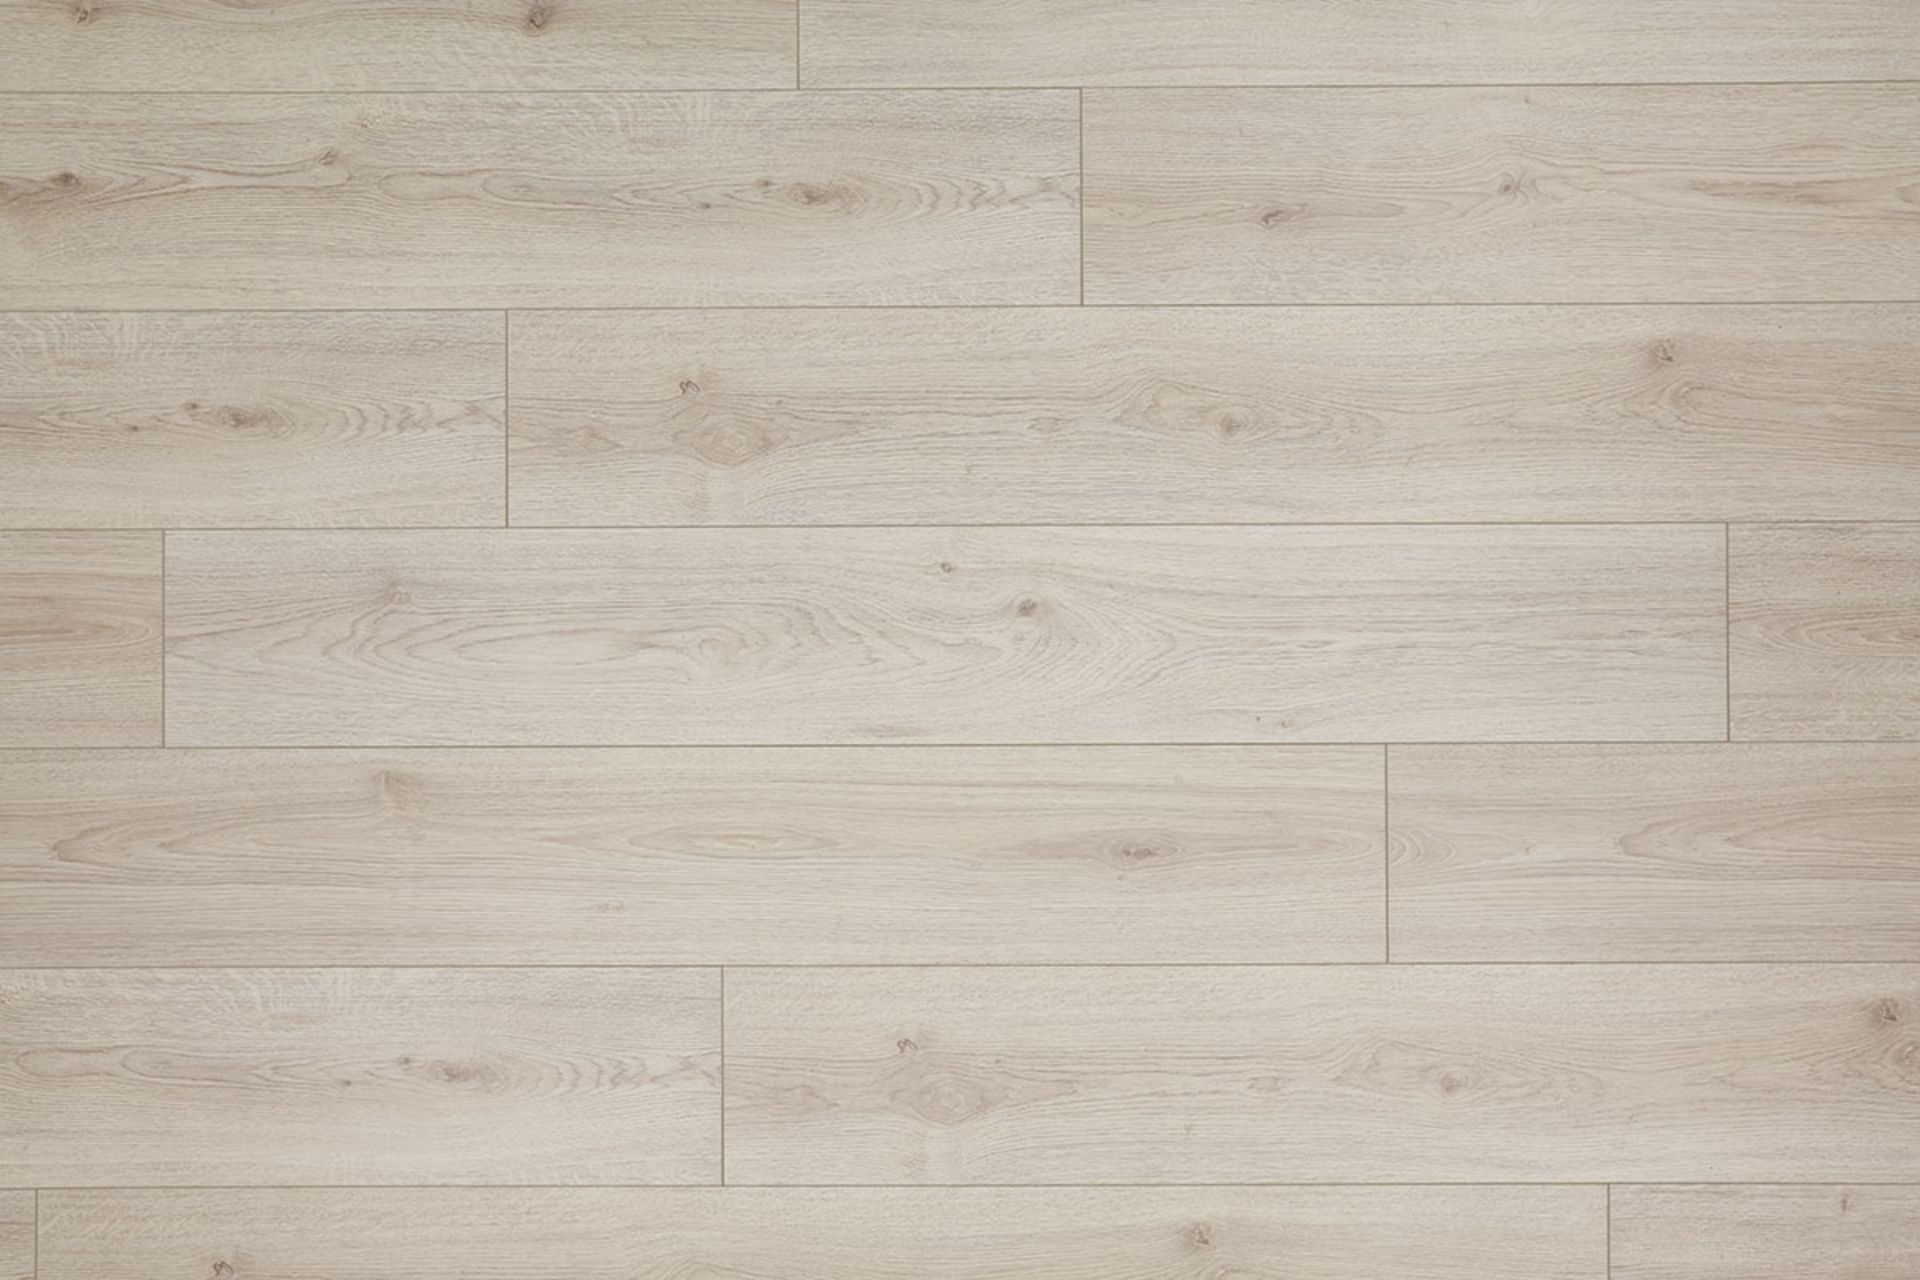 14.34M2 LAMINATE FLOORING TREND GREY OAK. With a warm grey hue and an authentic natural grain, ... - Image 2 of 2